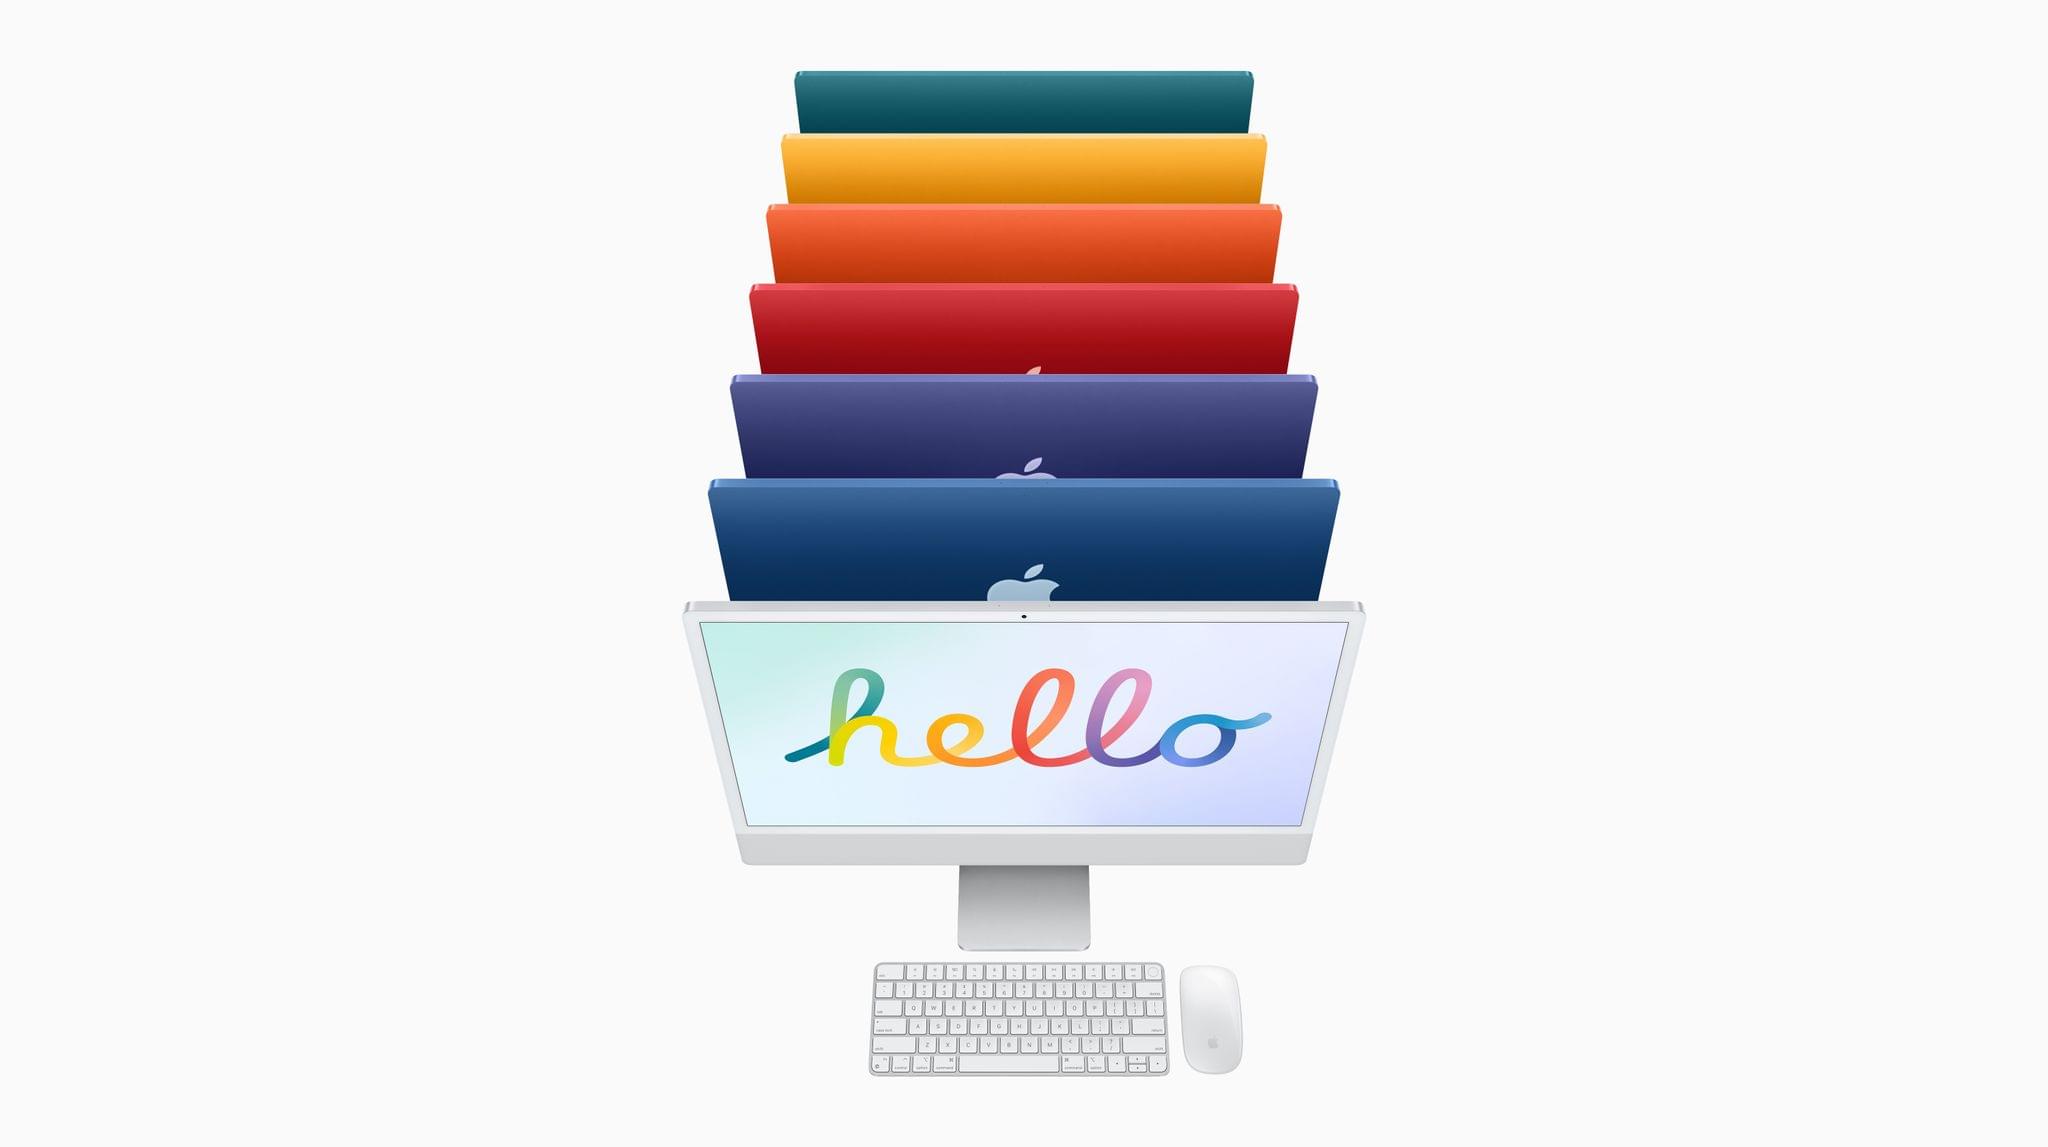 How to Use Hello Screen Saver from iMac on Other Macs